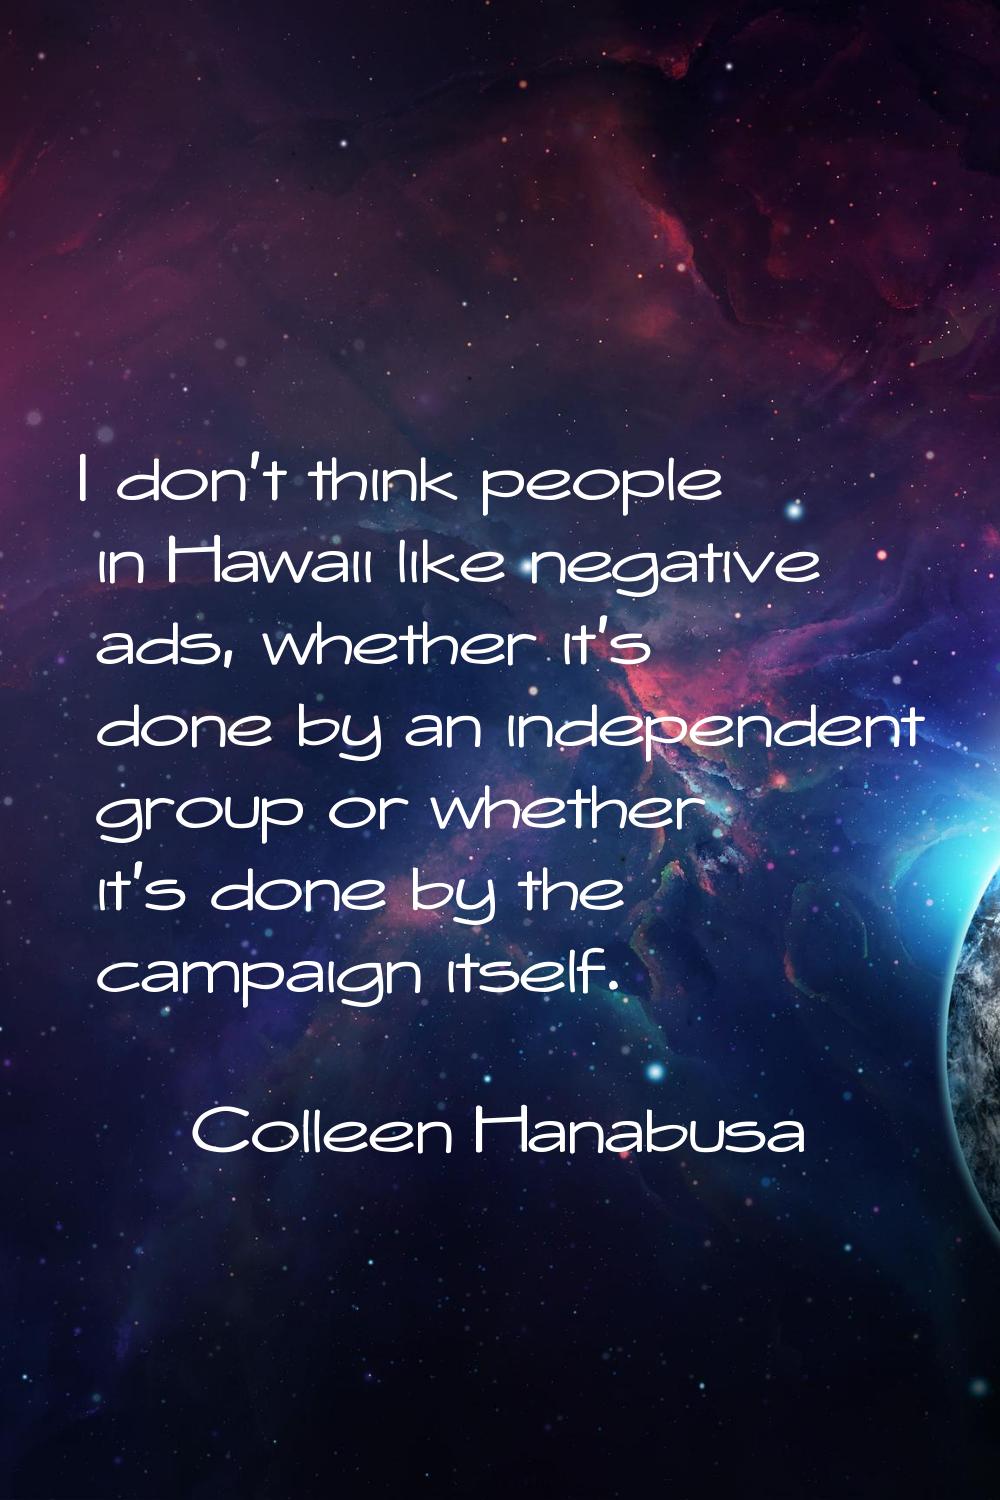 I don't think people in Hawaii like negative ads, whether it's done by an independent group or whet